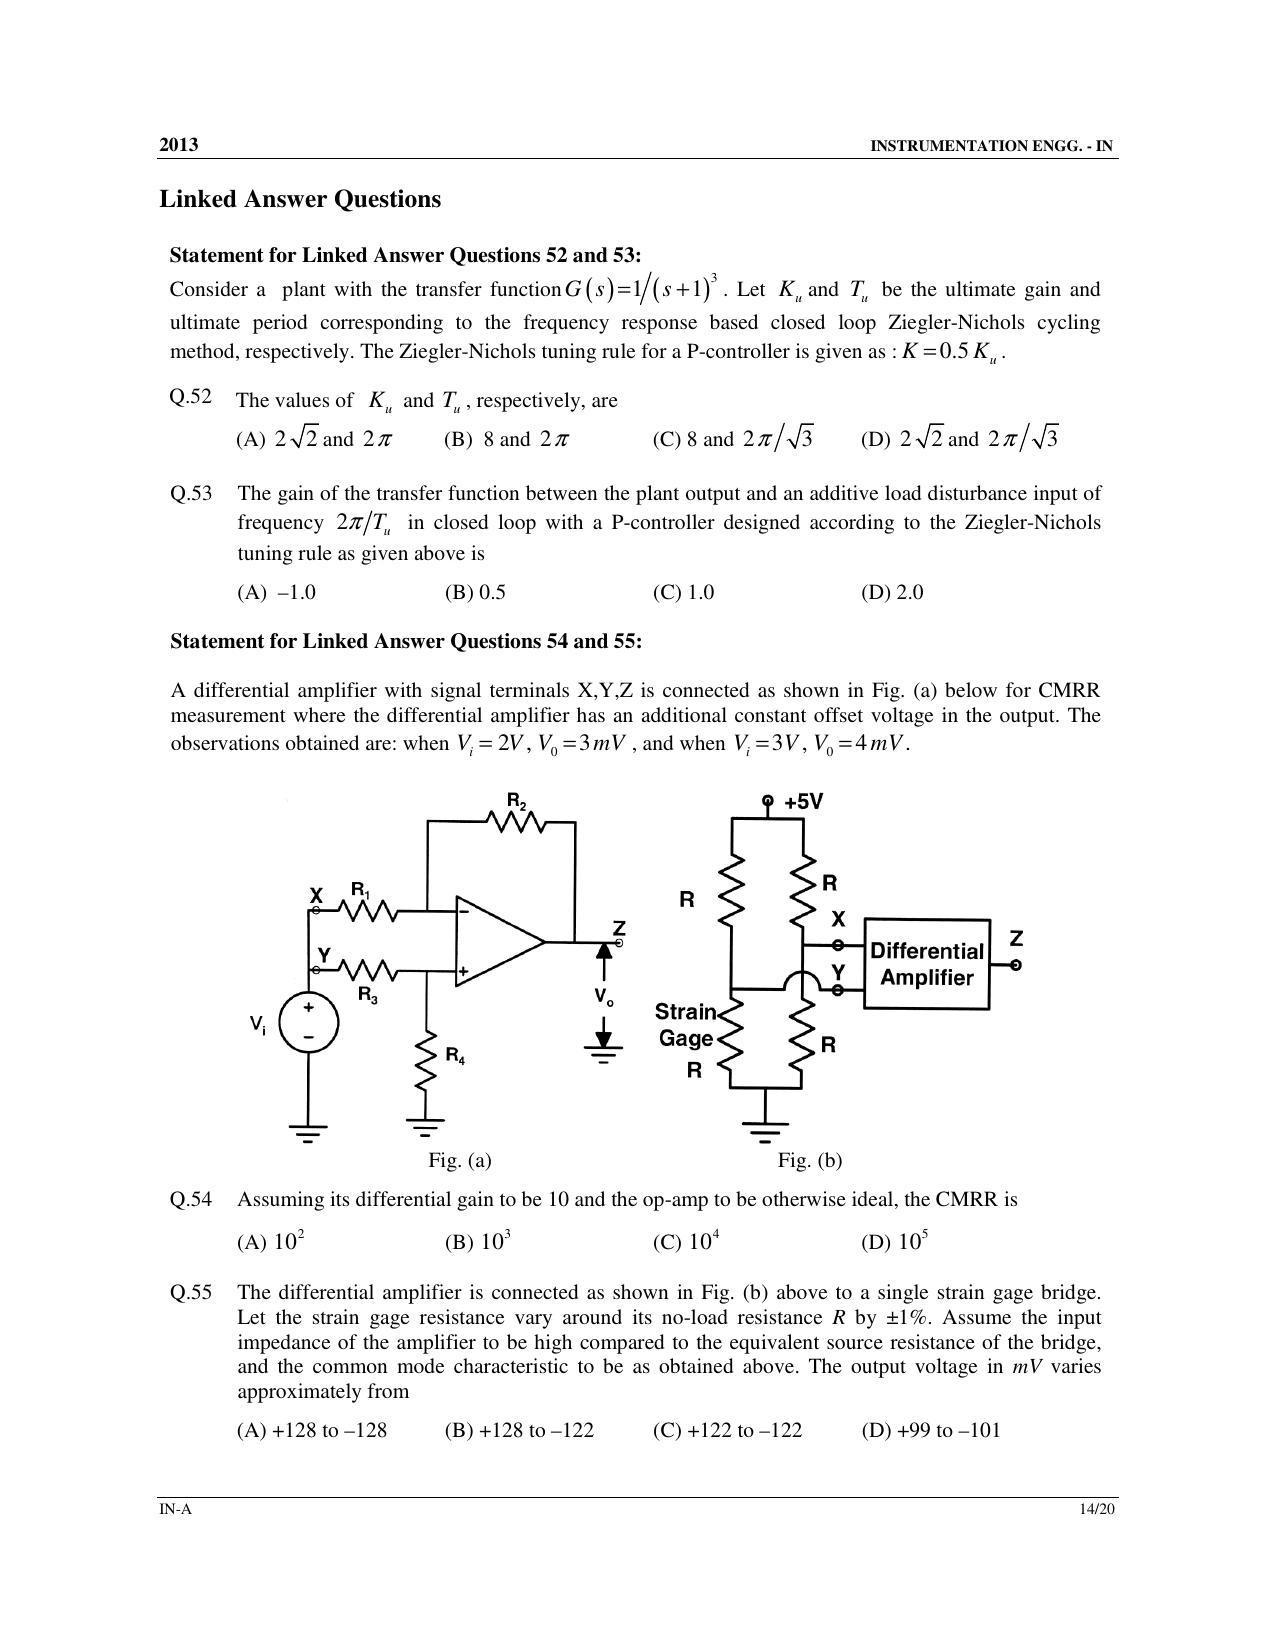 GATE 2013 Instrumentation Engineering (IN) Question Paper with Answer Key - Page 15